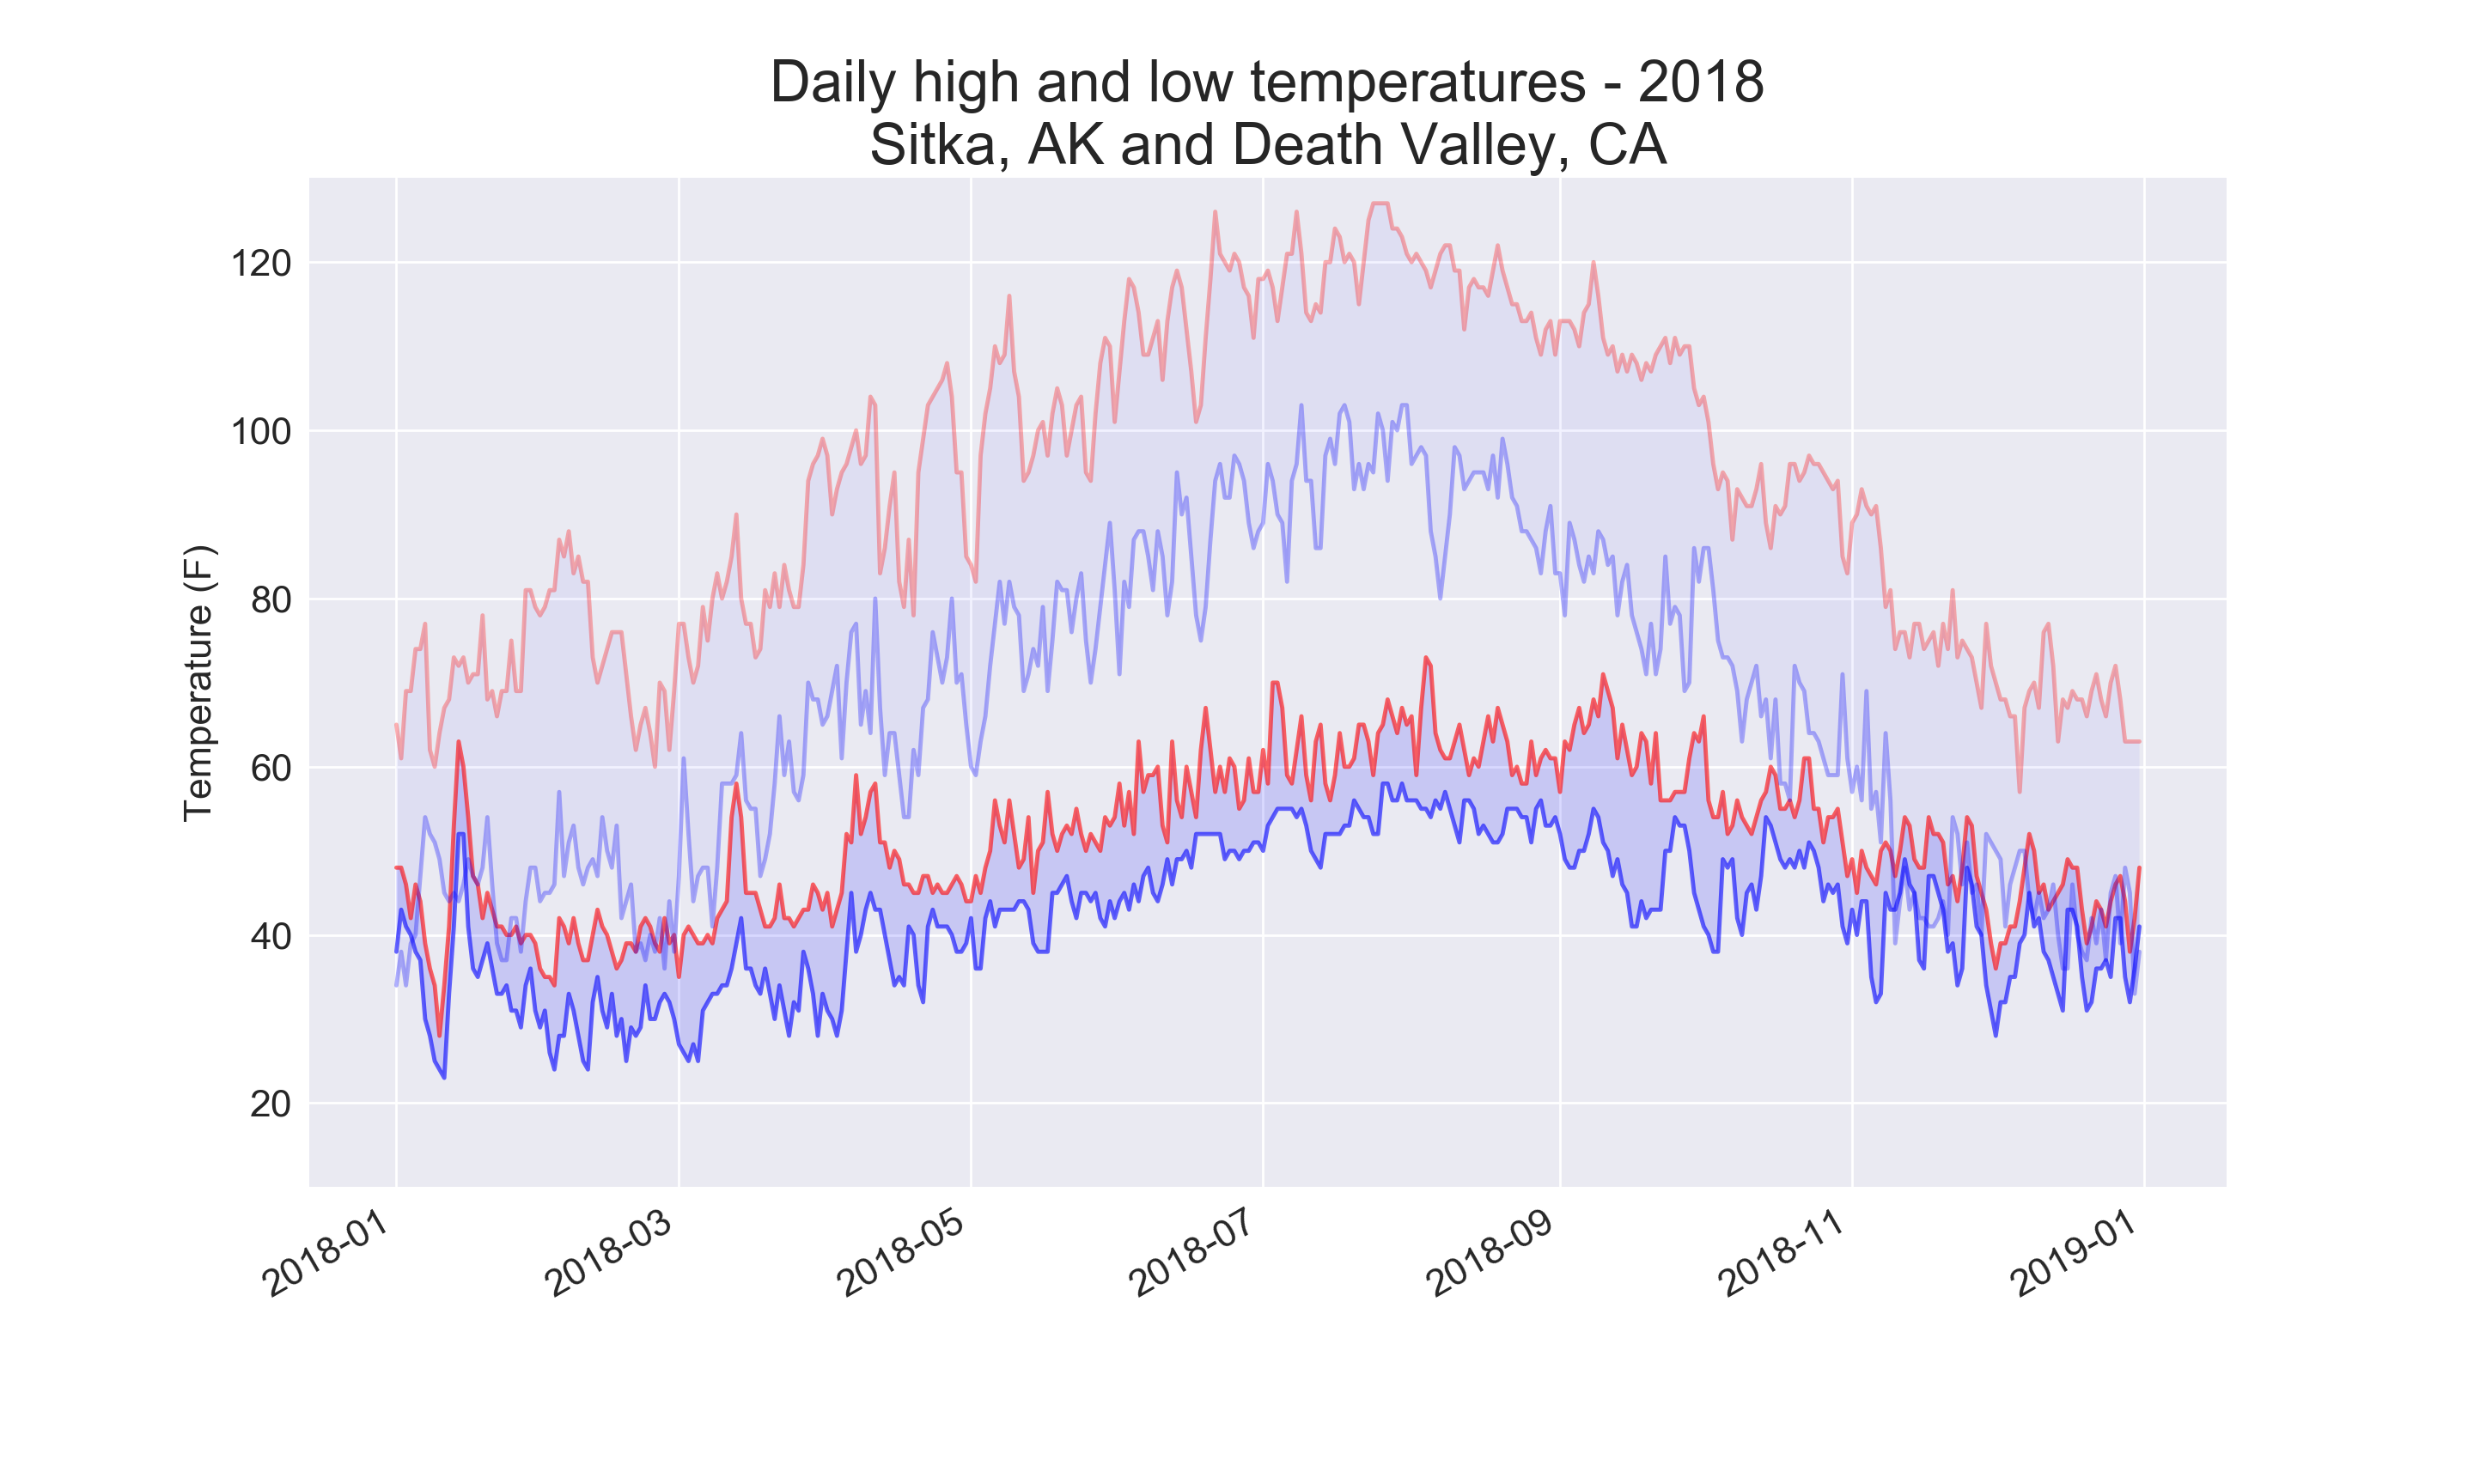 Daily high and low temperatures for Sitka, AK and Death Valley, CA for 2018